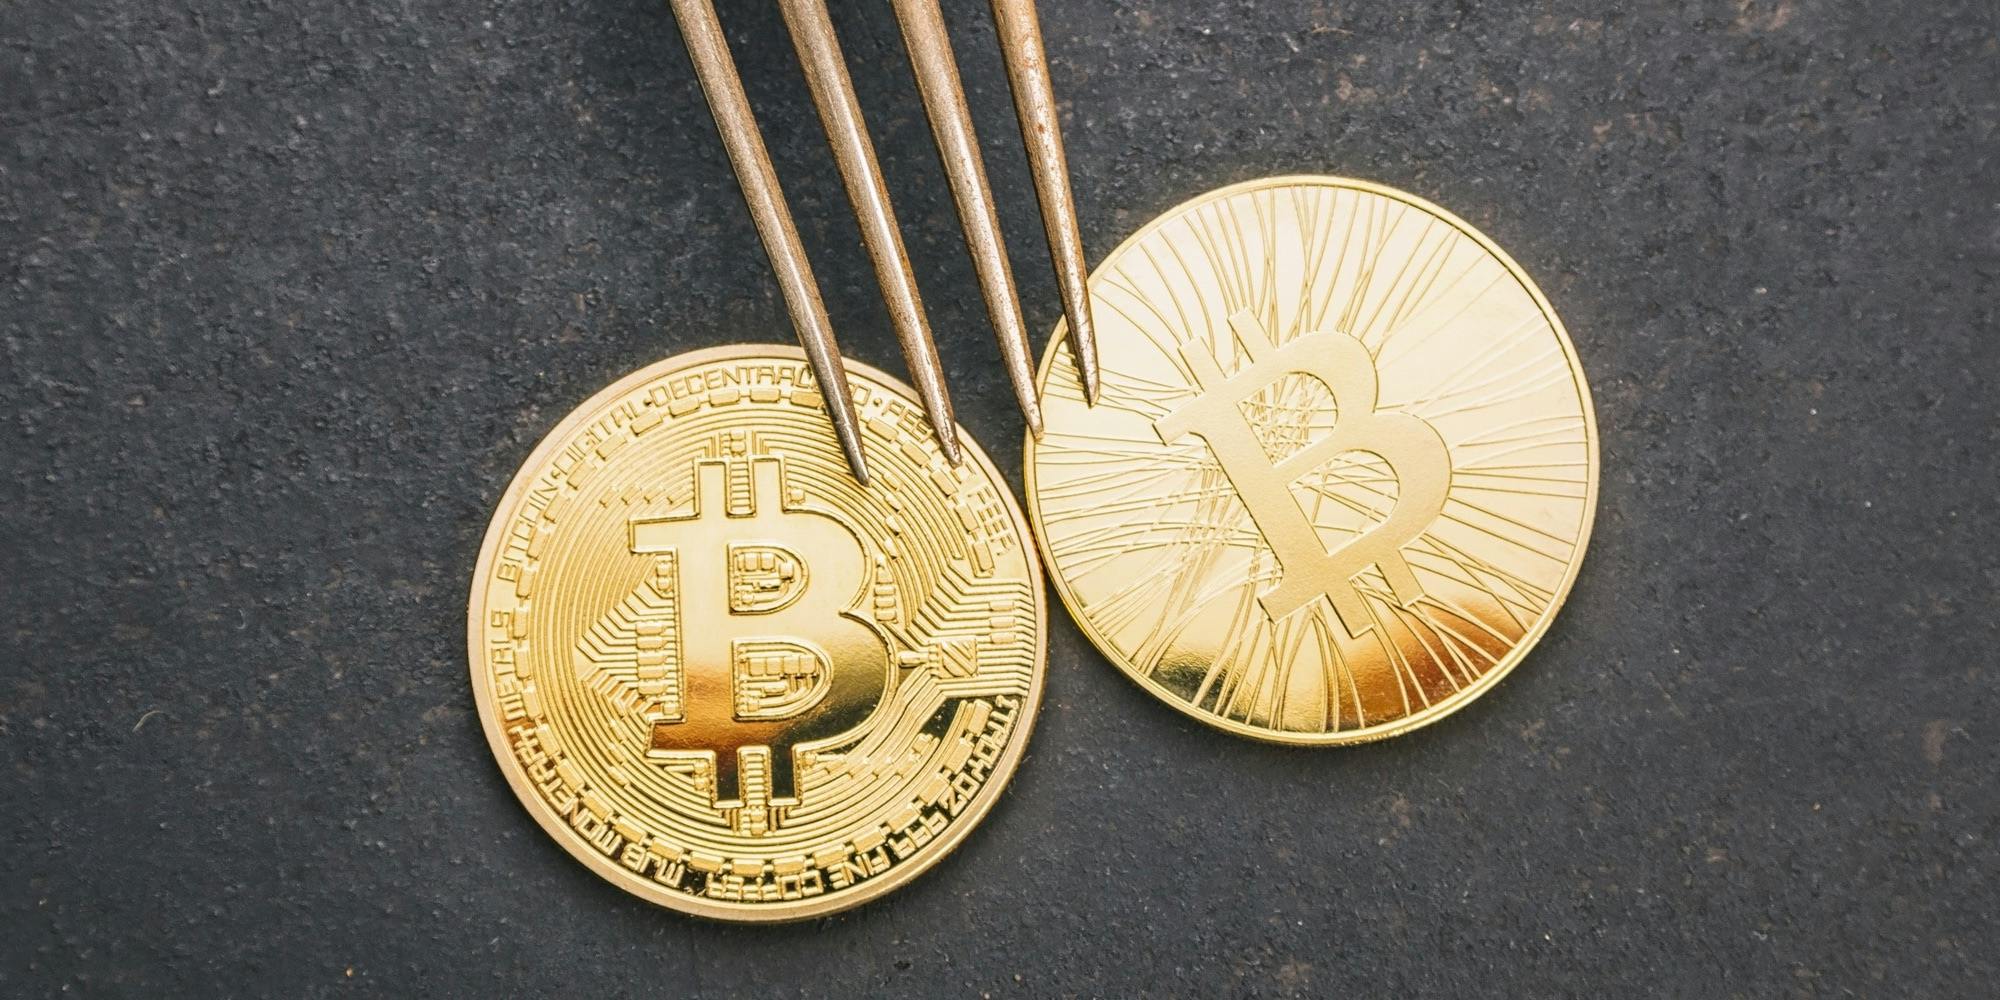 featured image - The Midas Touch: The New Bitcoin Fork BTCU Showed the World Its Team Led by Eric Ma as CEO